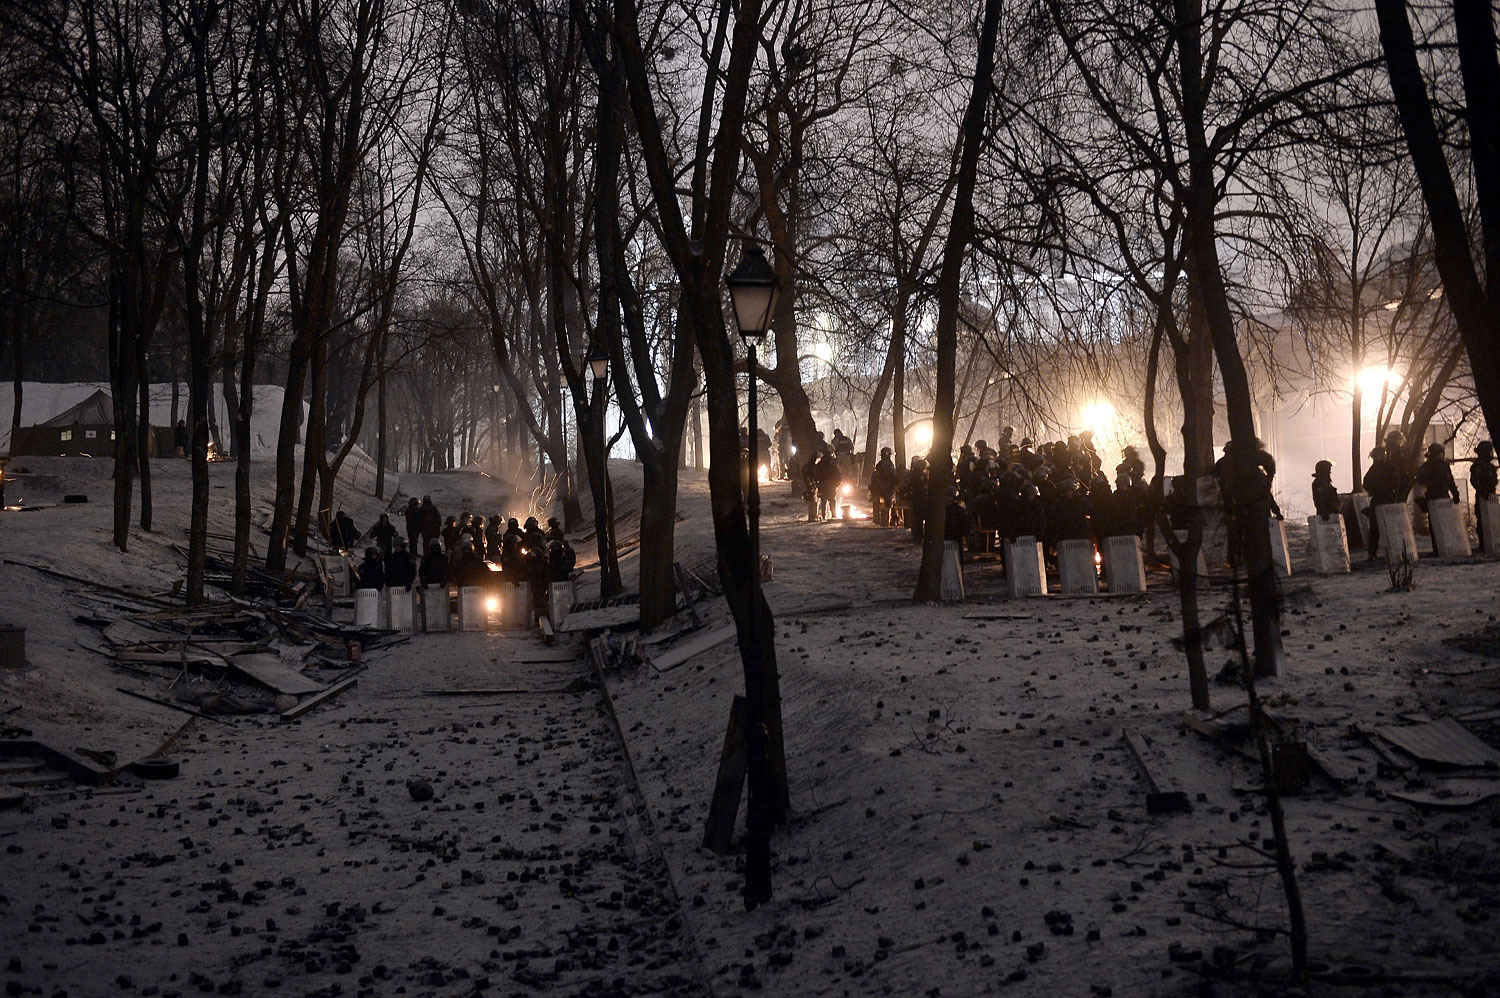 Riot police stand guard opposite anti-government protesters in a park area near a road block in Kiev on Jan. 28, 2014.